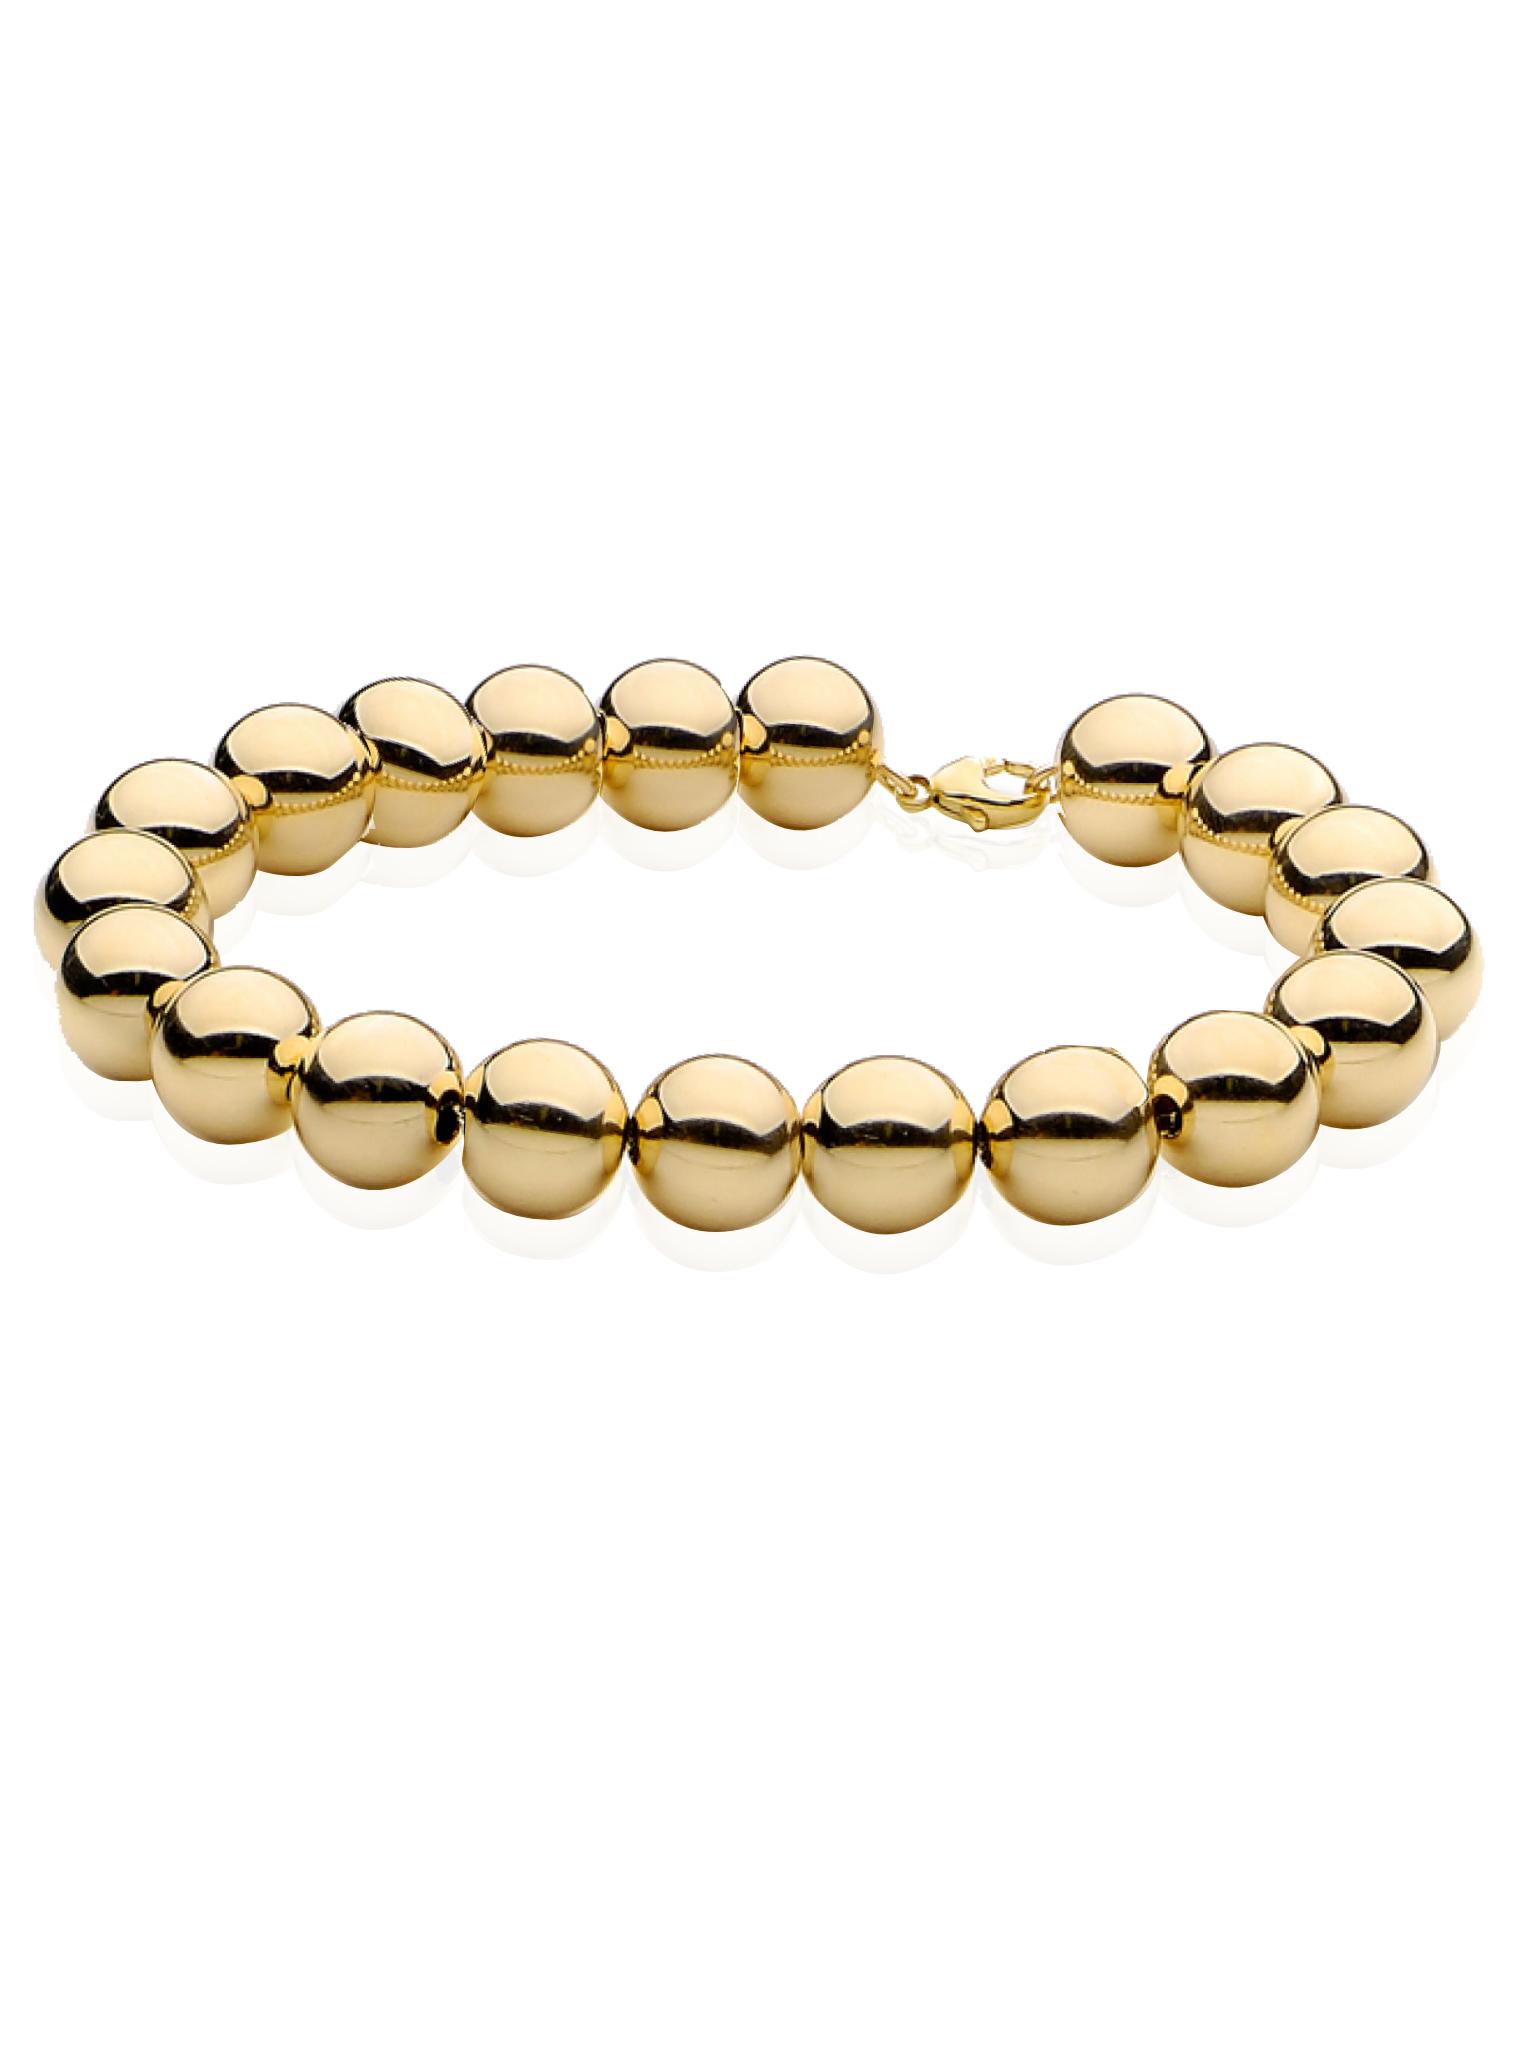 14ct Rolled Gold 10mm Ball Bead Bracelet — The Jewel Shop